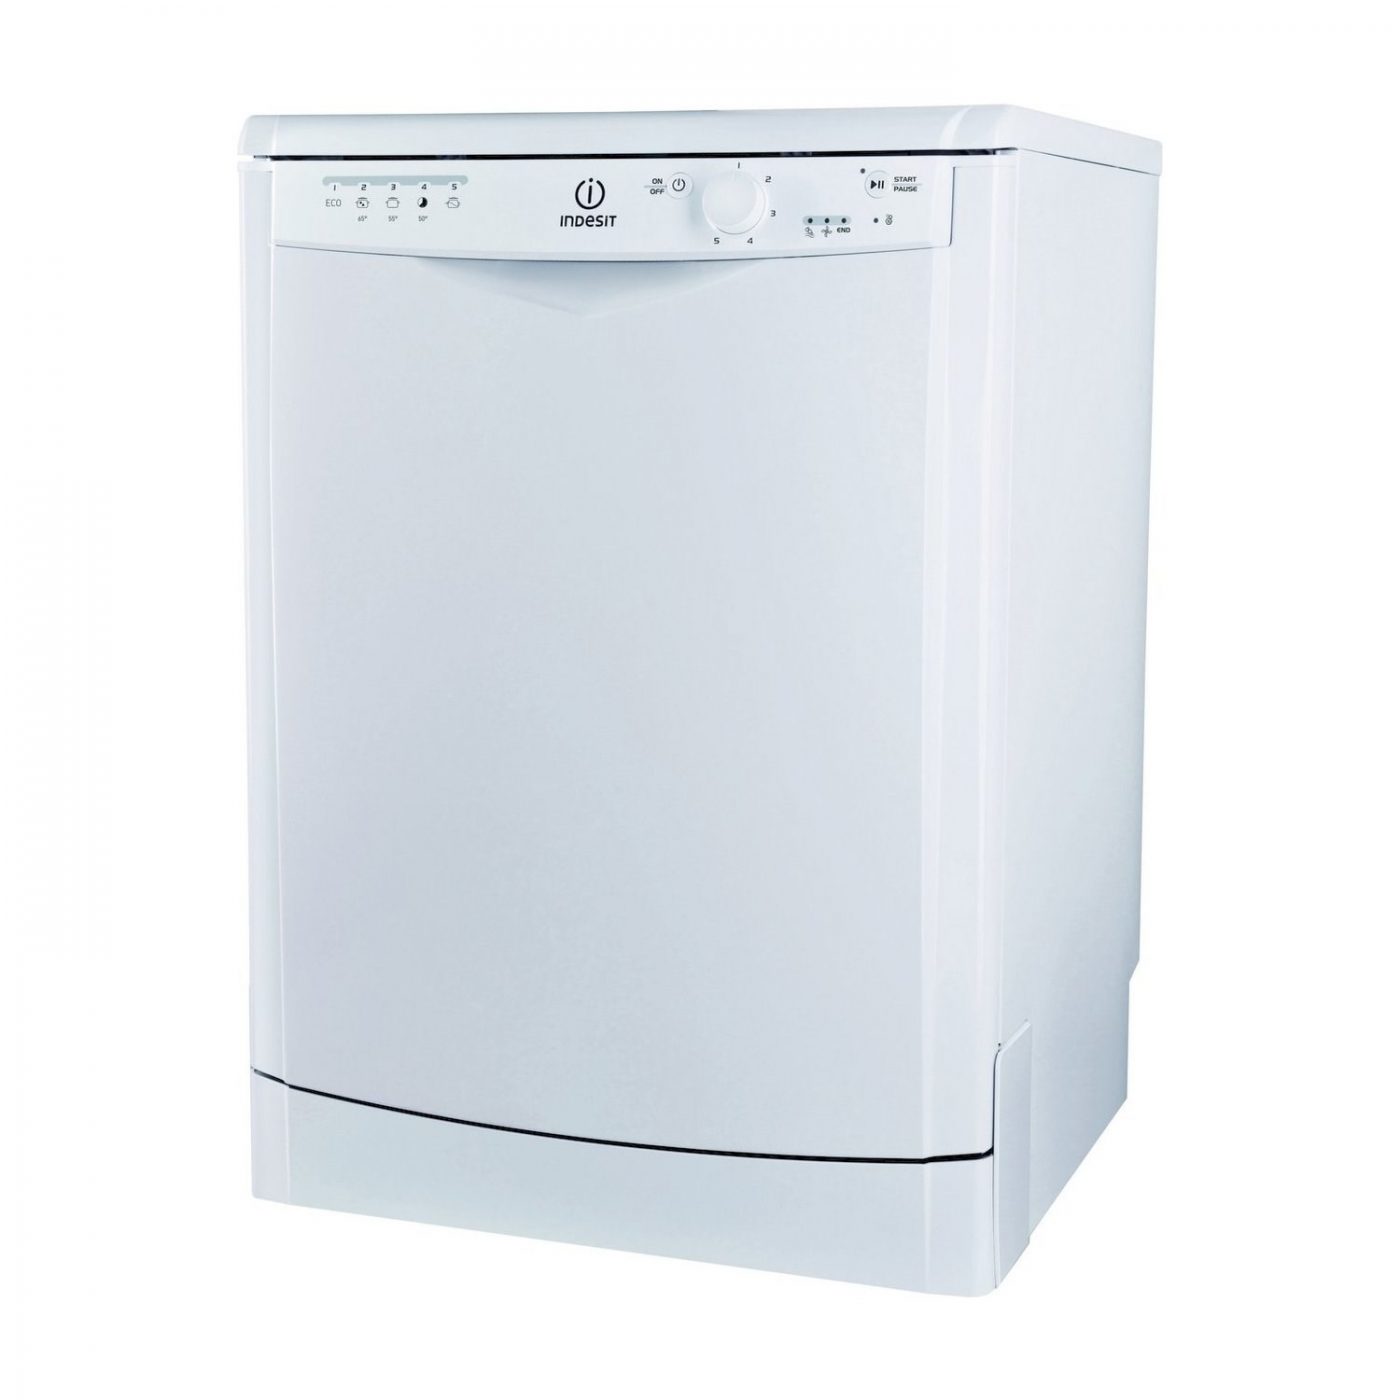 INDESIT DFG15B1 Ecotime 13 Place Freestanding Dishwasher with Quick